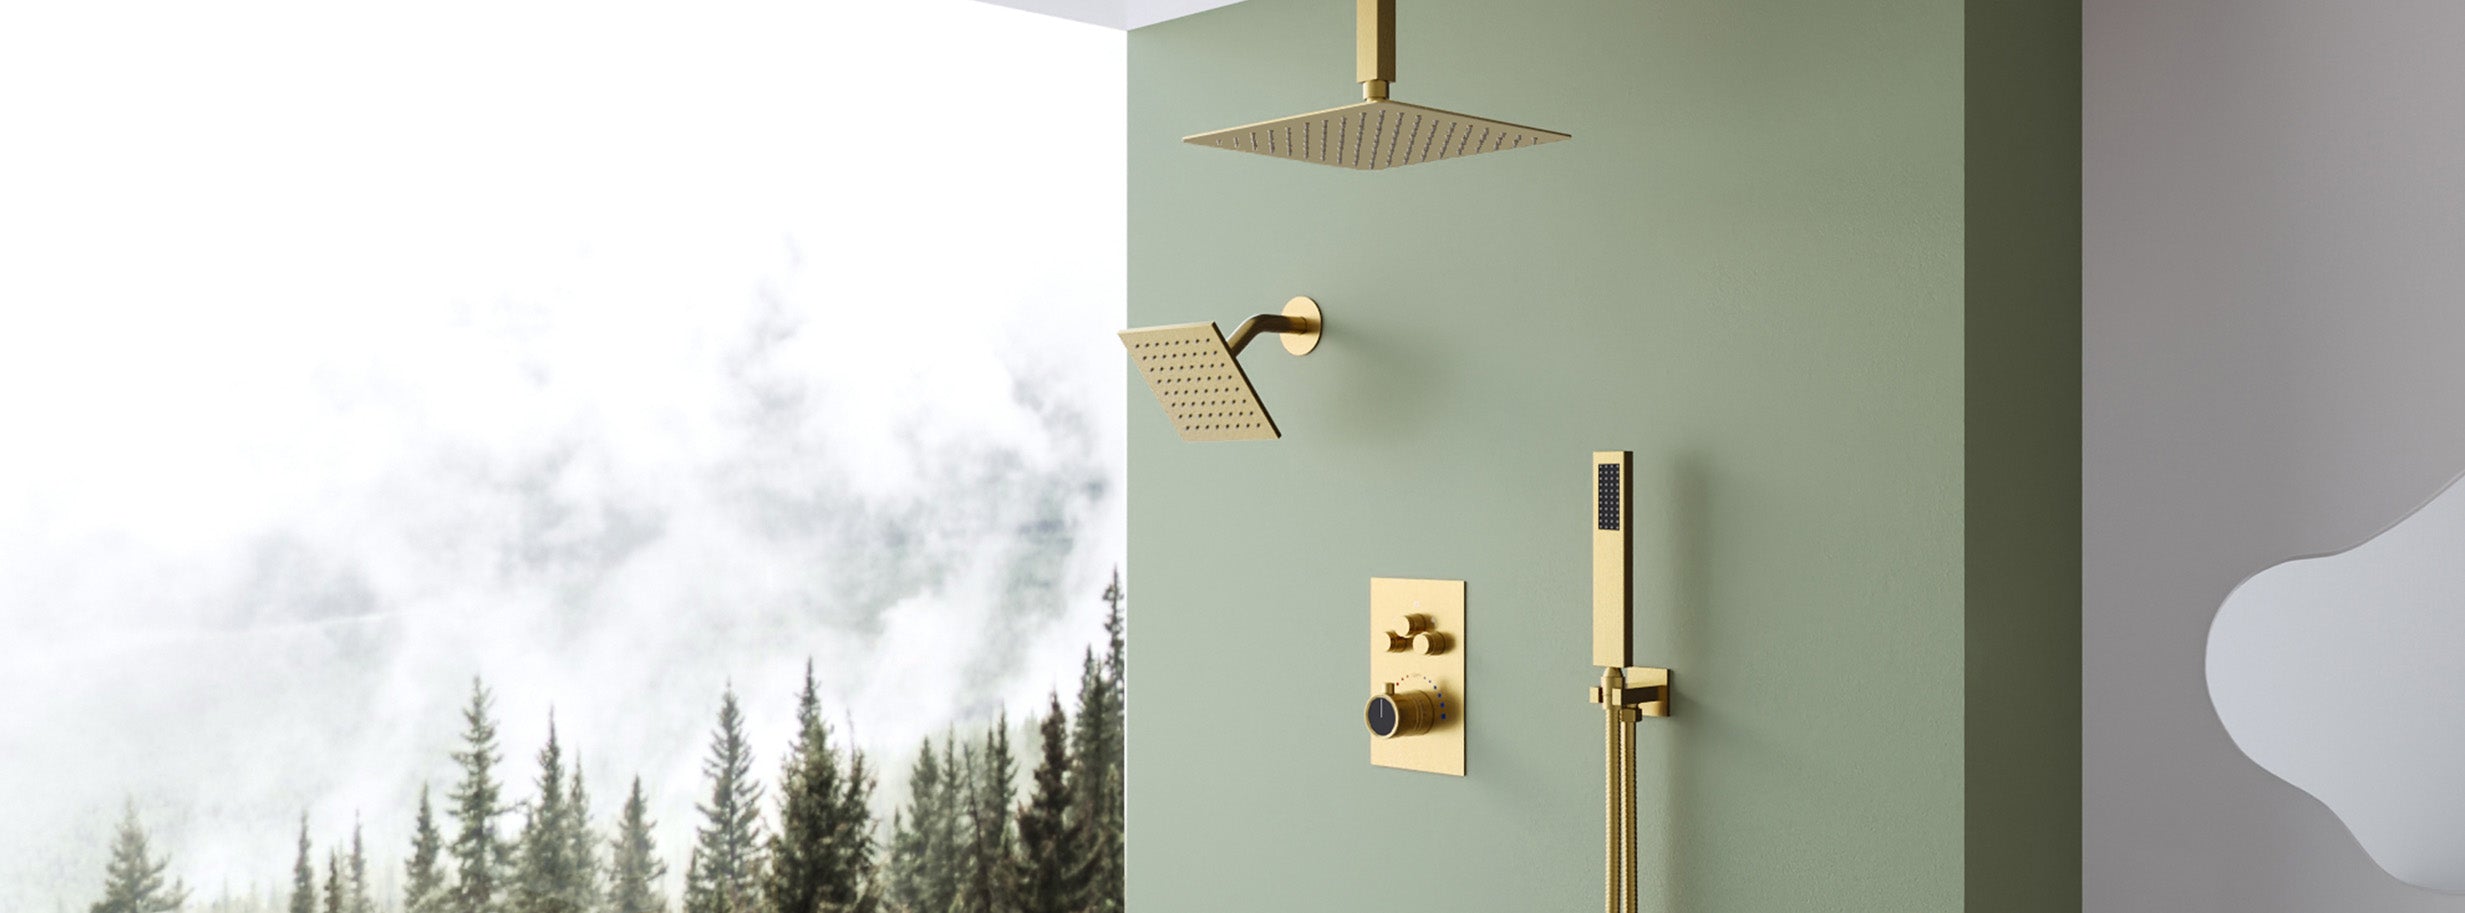 5 Tips for Choosing the Perfect Bathroom Shower Faucet Set